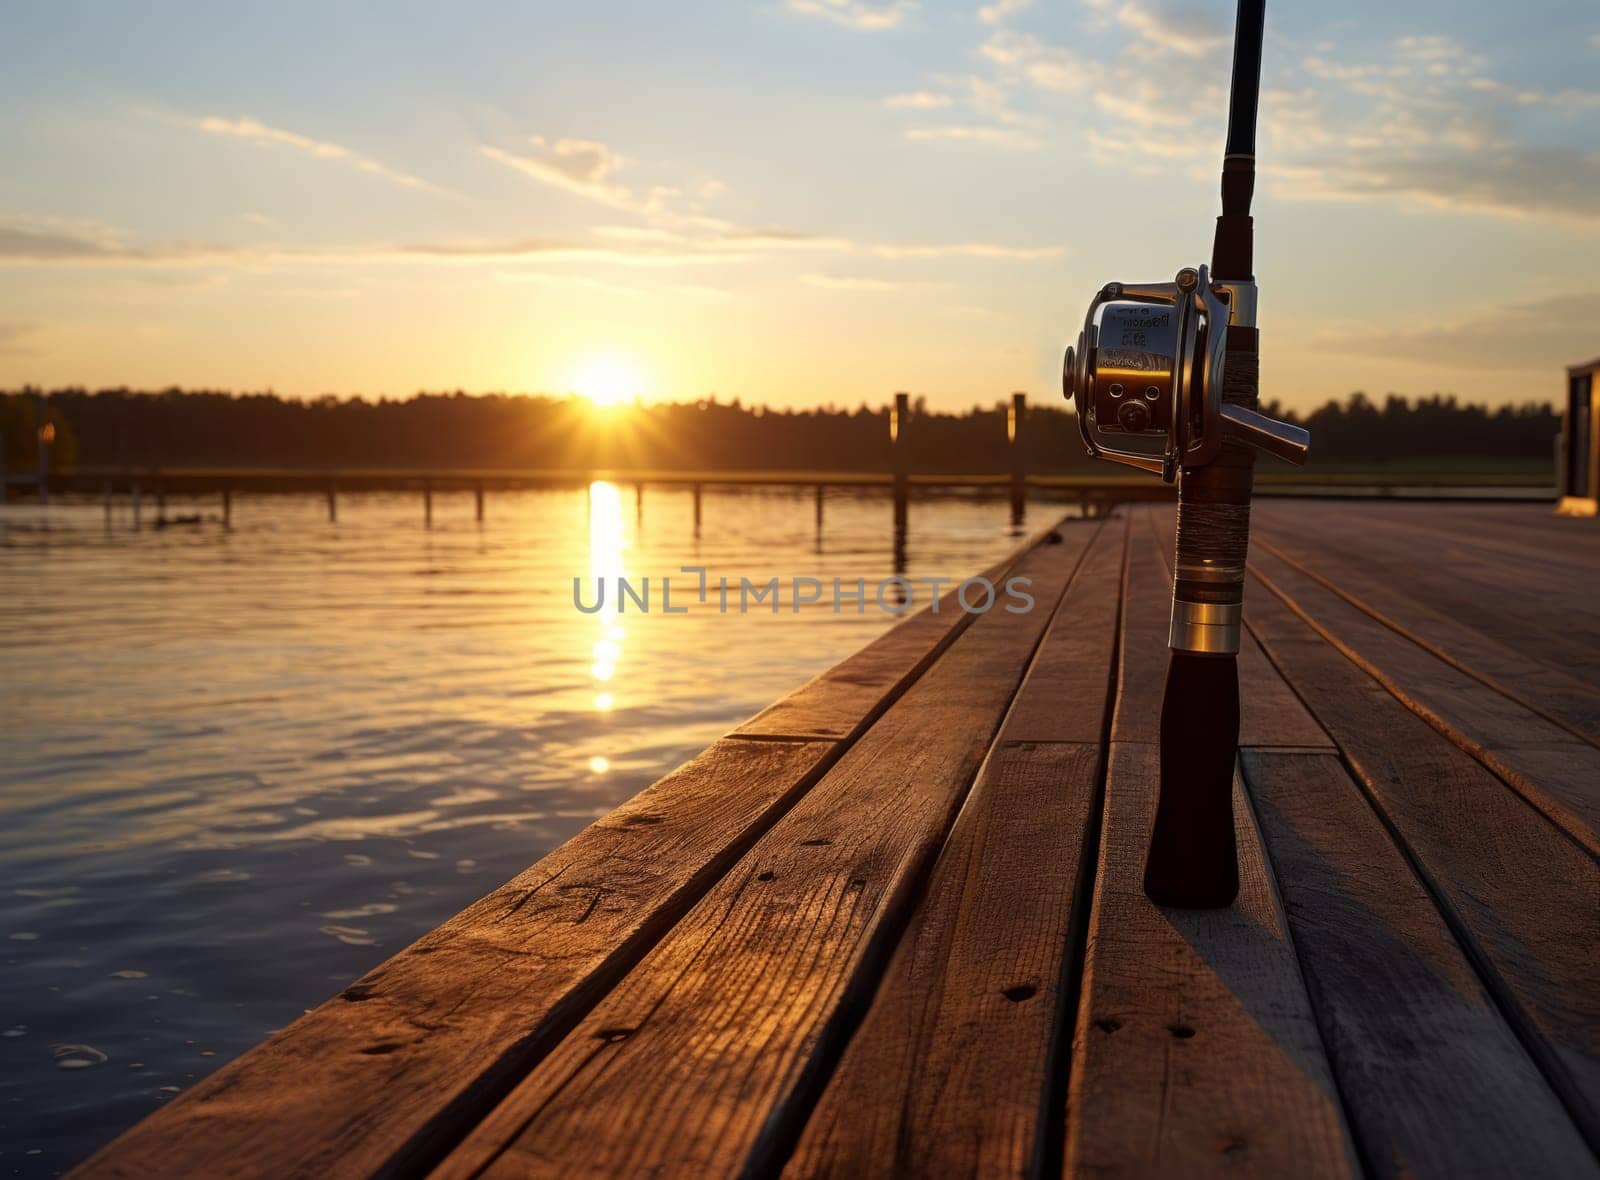 A fishing rod on a wooden dock at sunset with the sun setting over the horizon and calm water